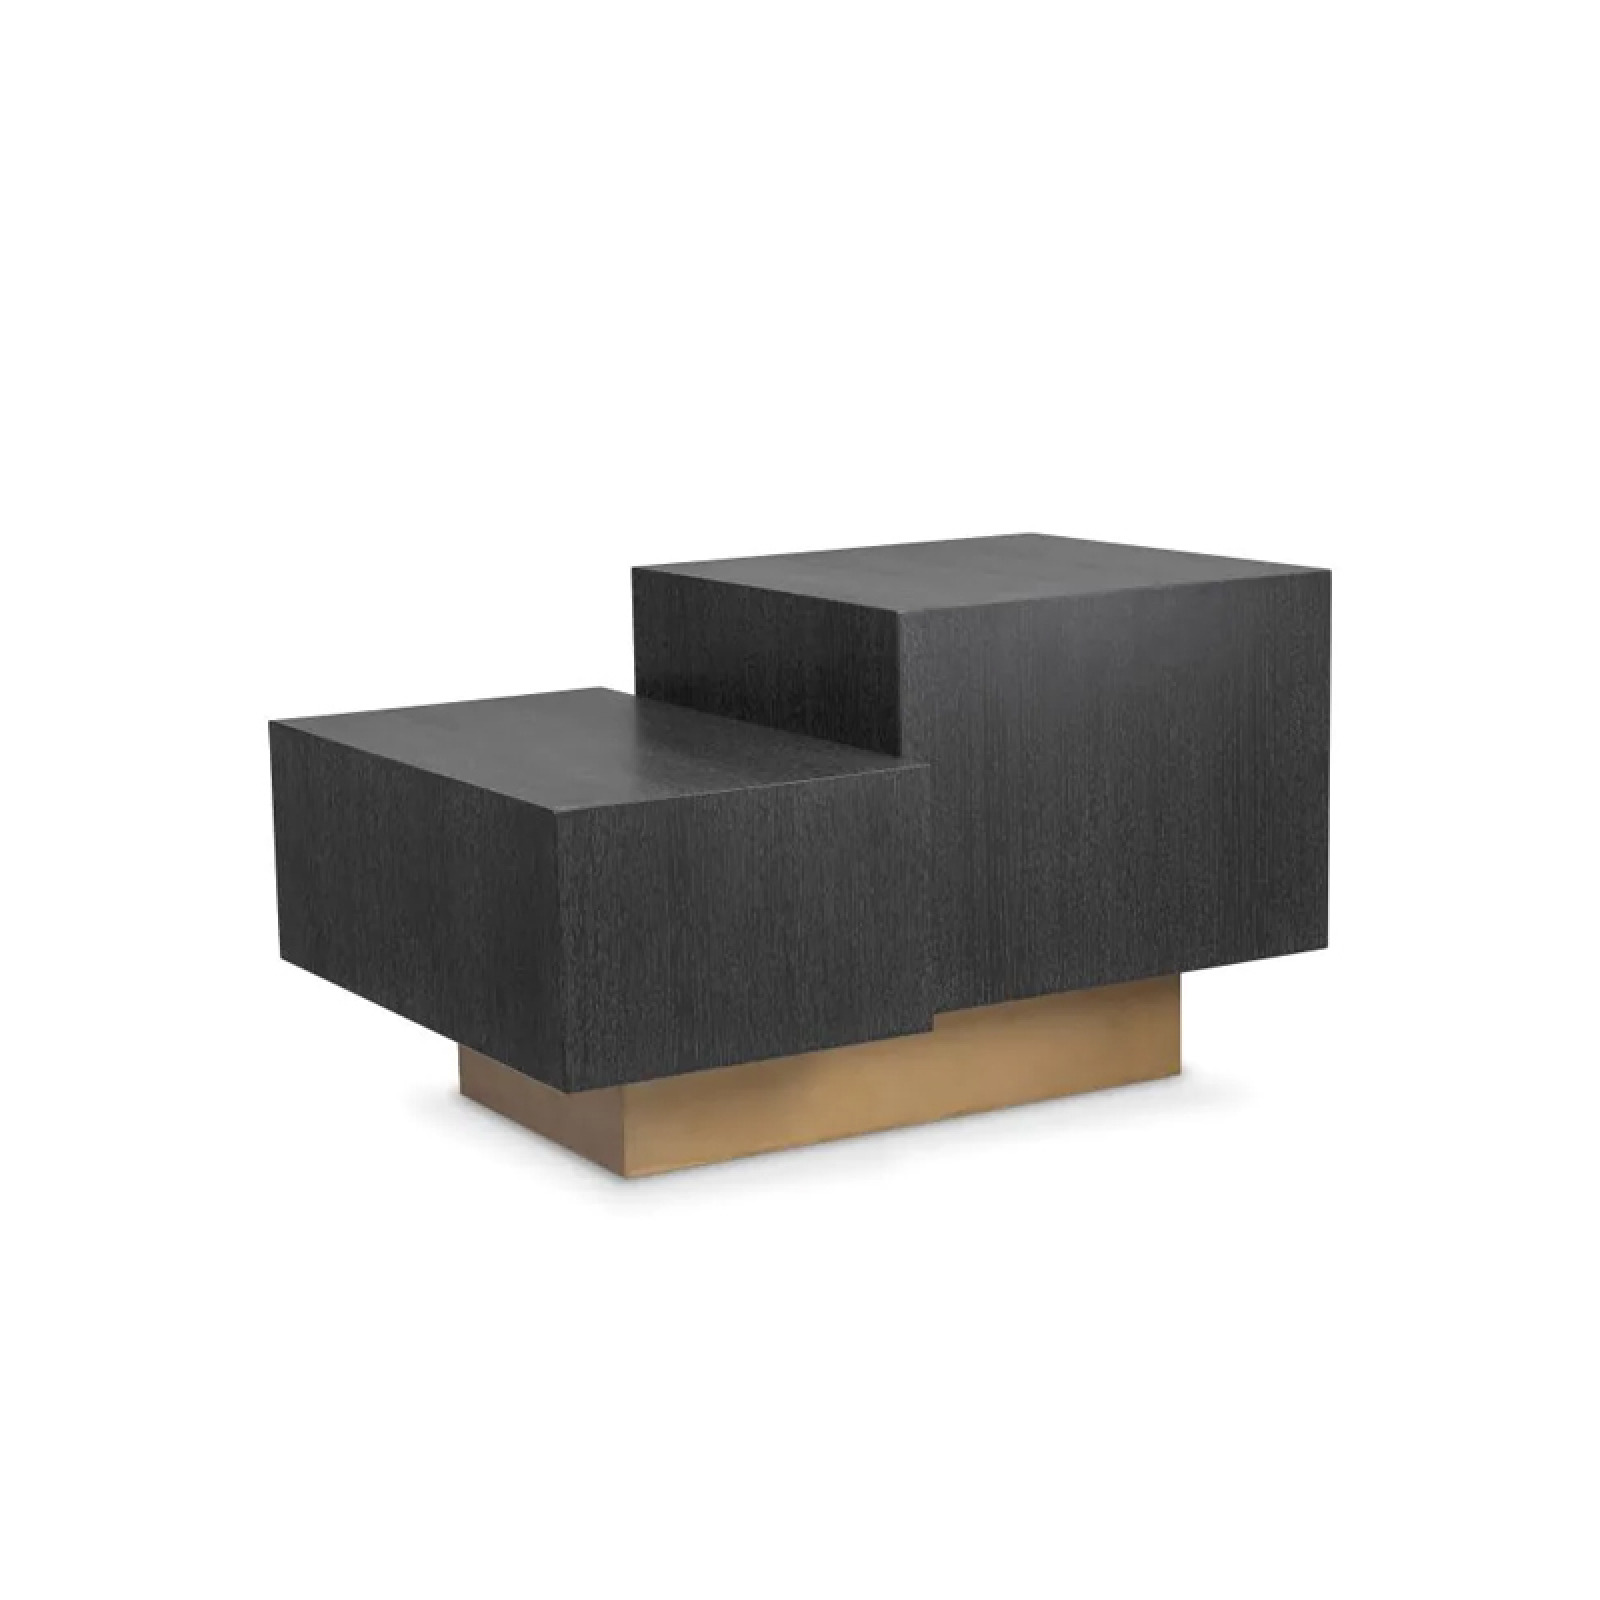 Nerone side table